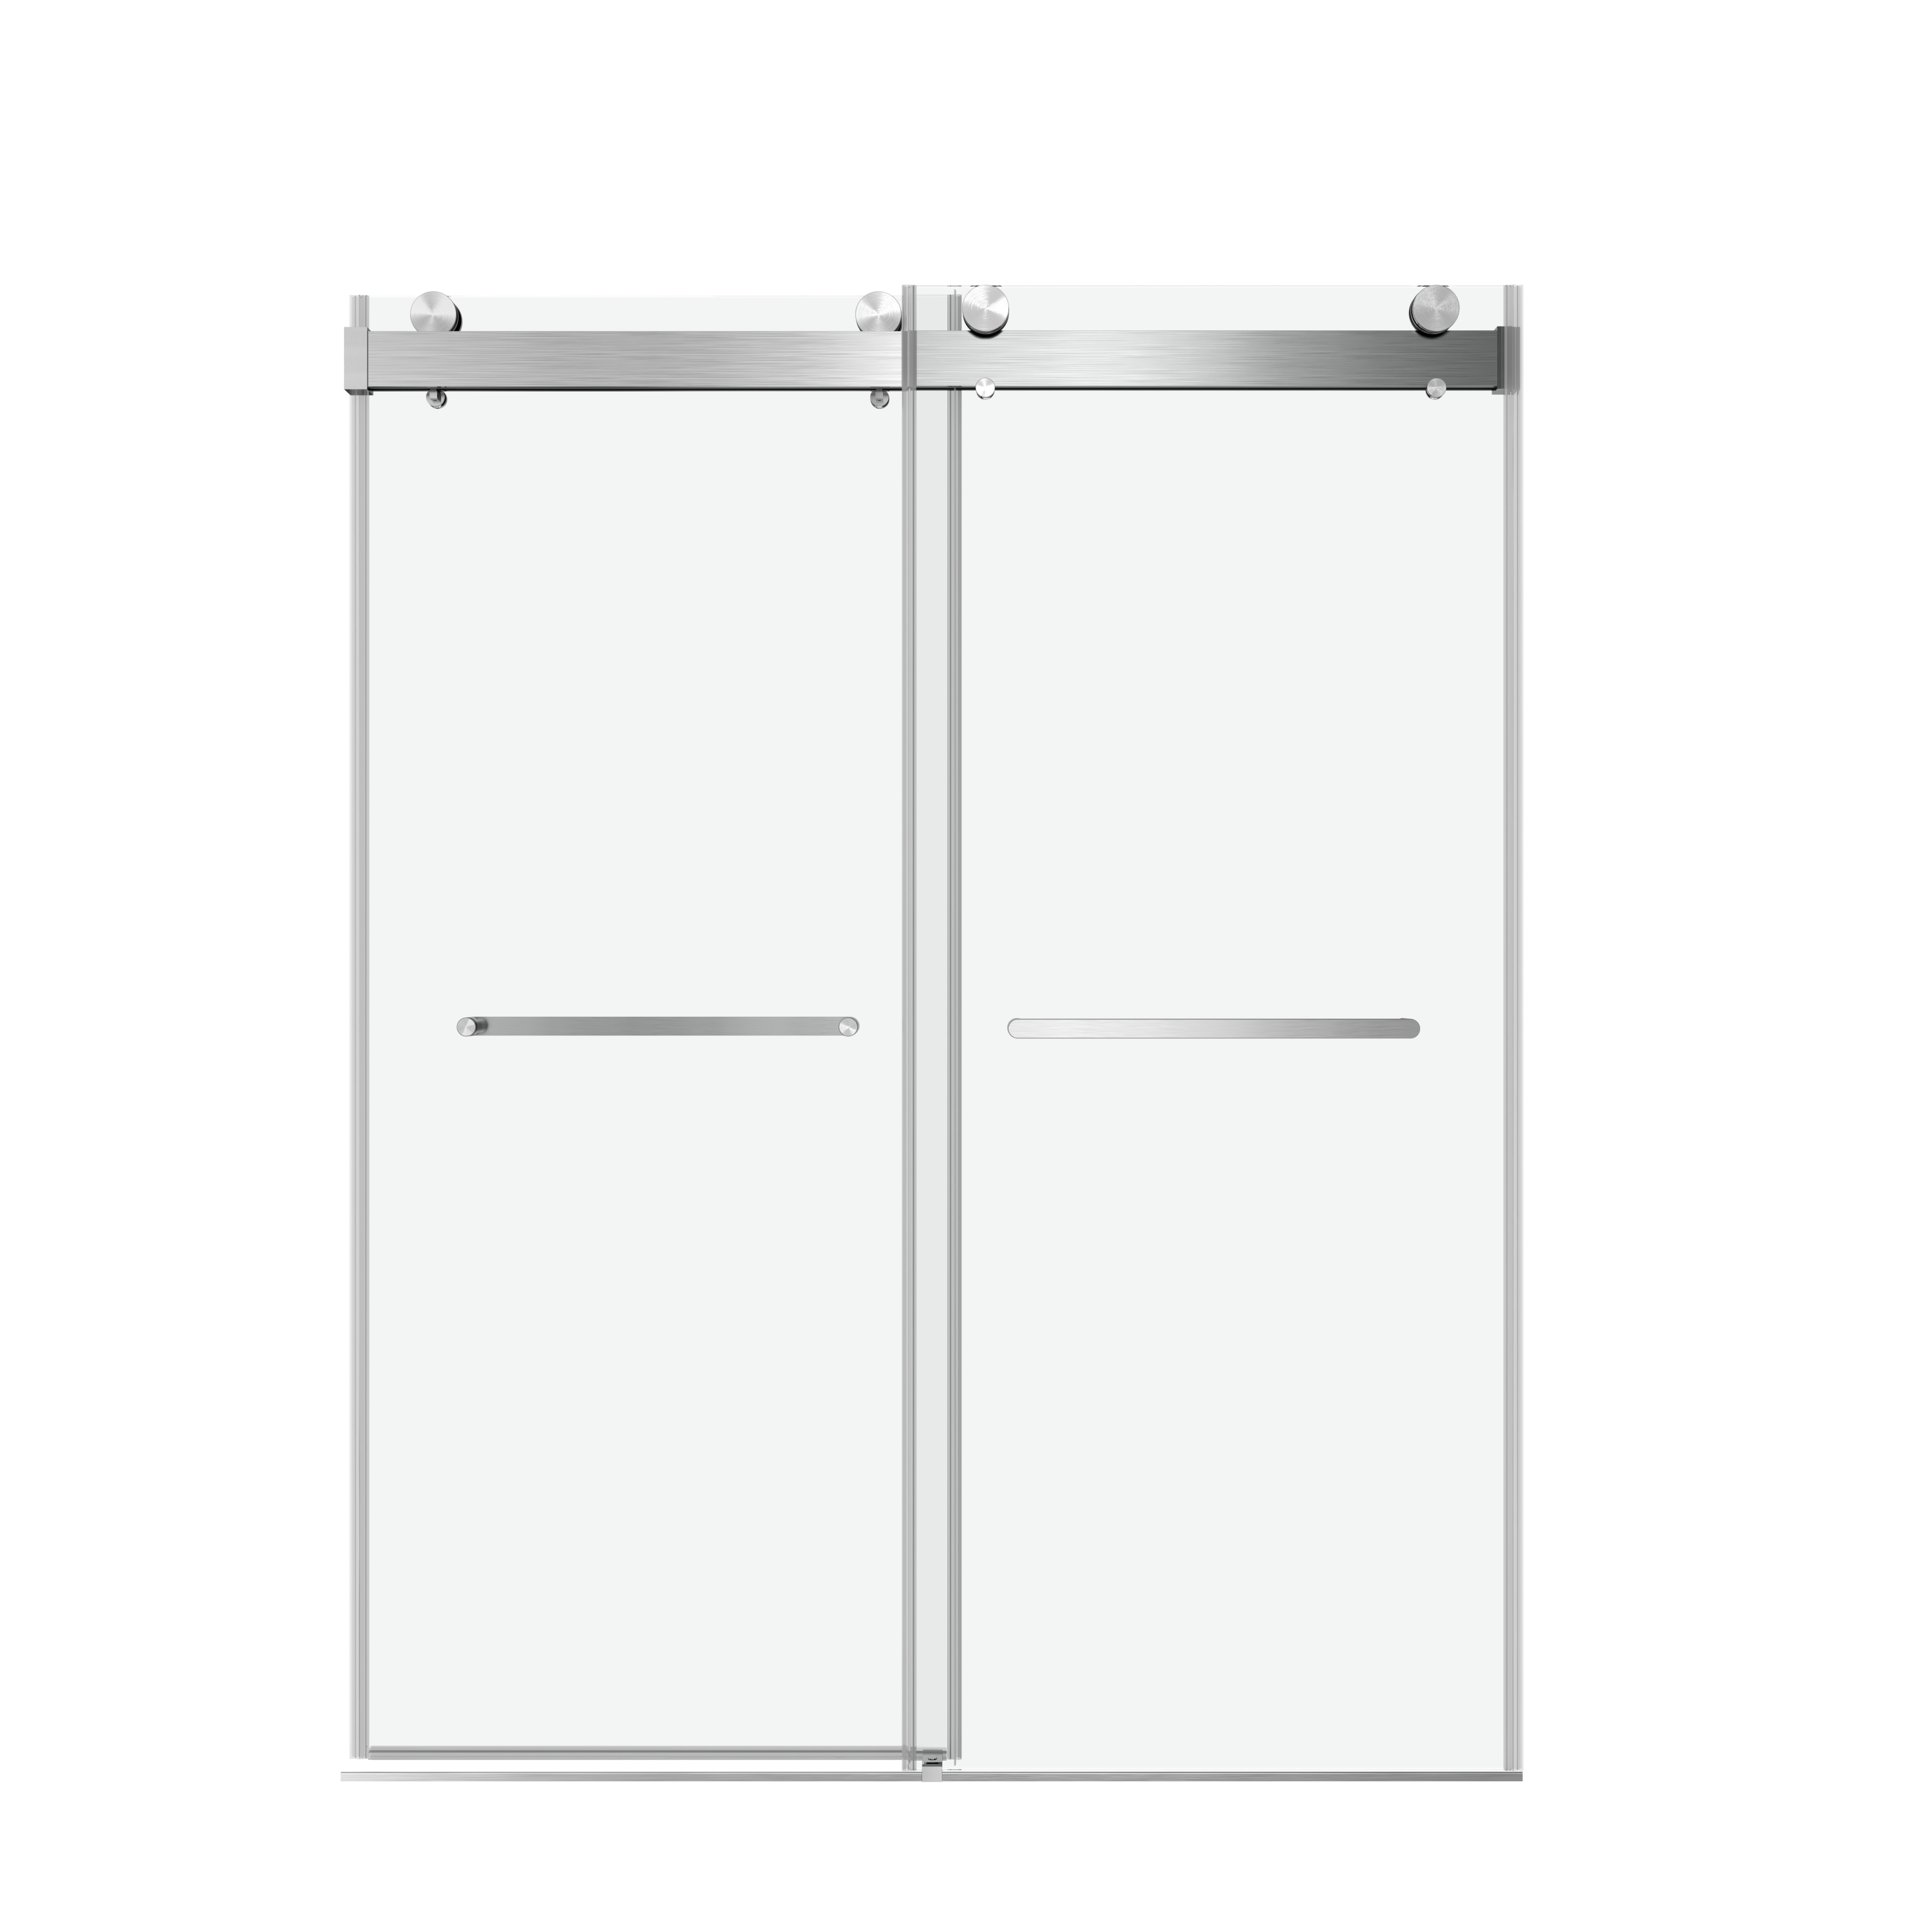 60" W x 76" H Double Sliding Frameless Soft-Close Shower Door with Premium 3/8 Inch